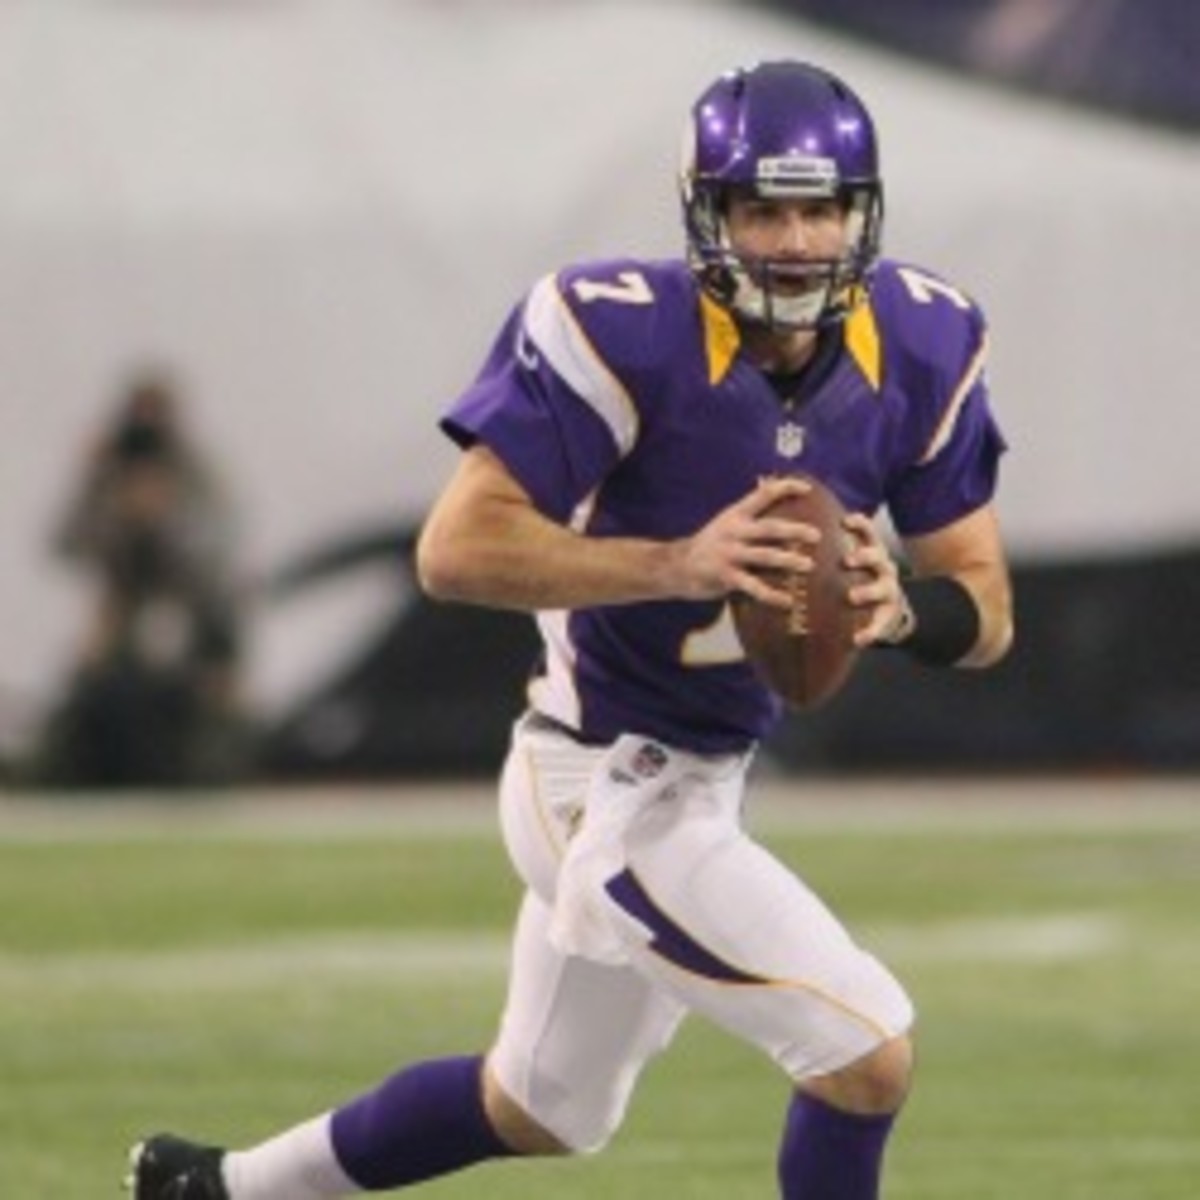 Vikings quarterback Christian Ponder is dealing with elbow bursitis. (Andy King/Getty Images)